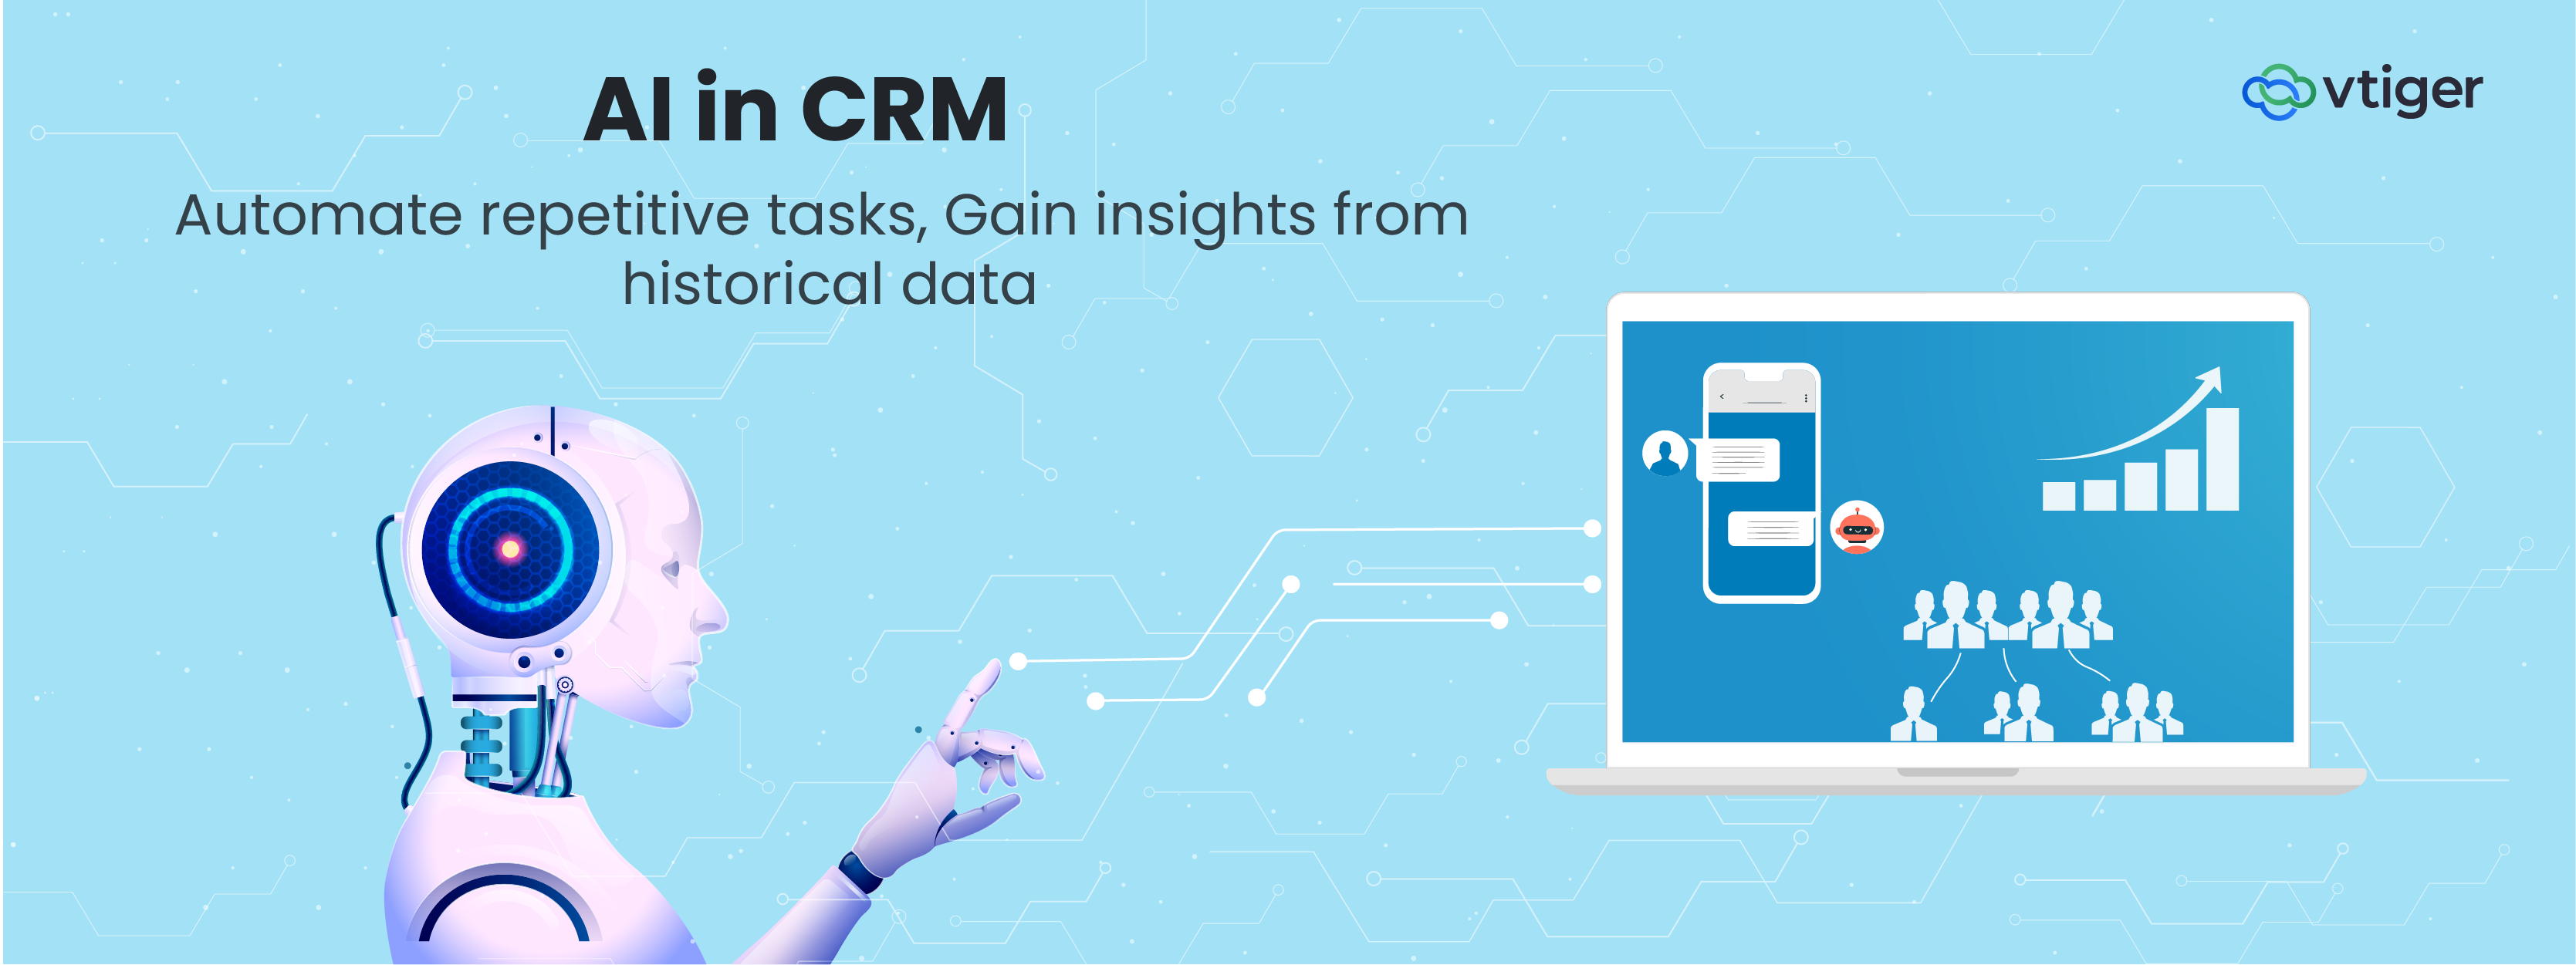 AI in CRM_banner 2